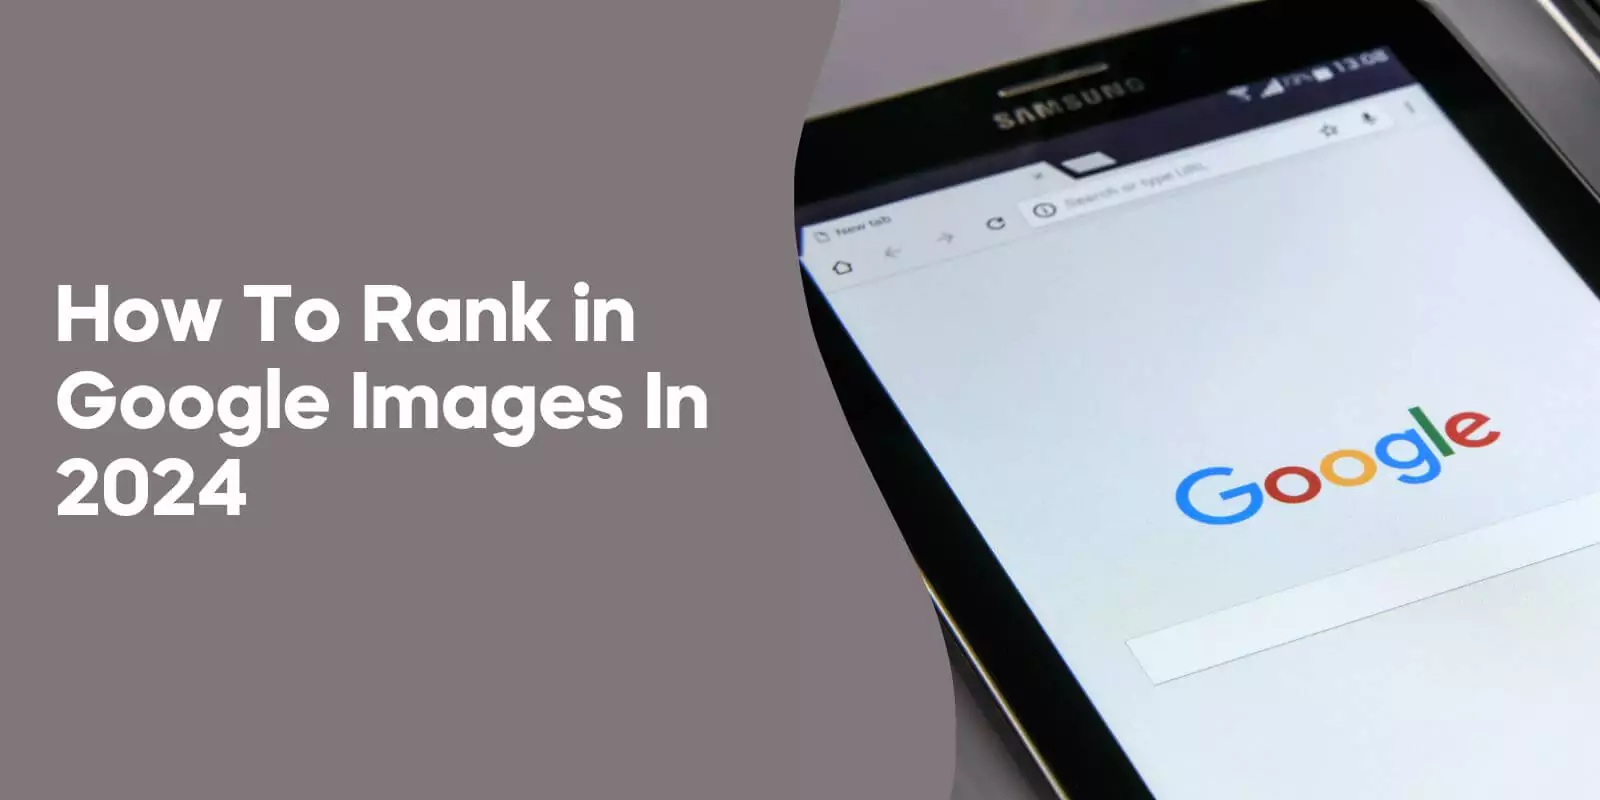 How To Rank in Google Images In 2024